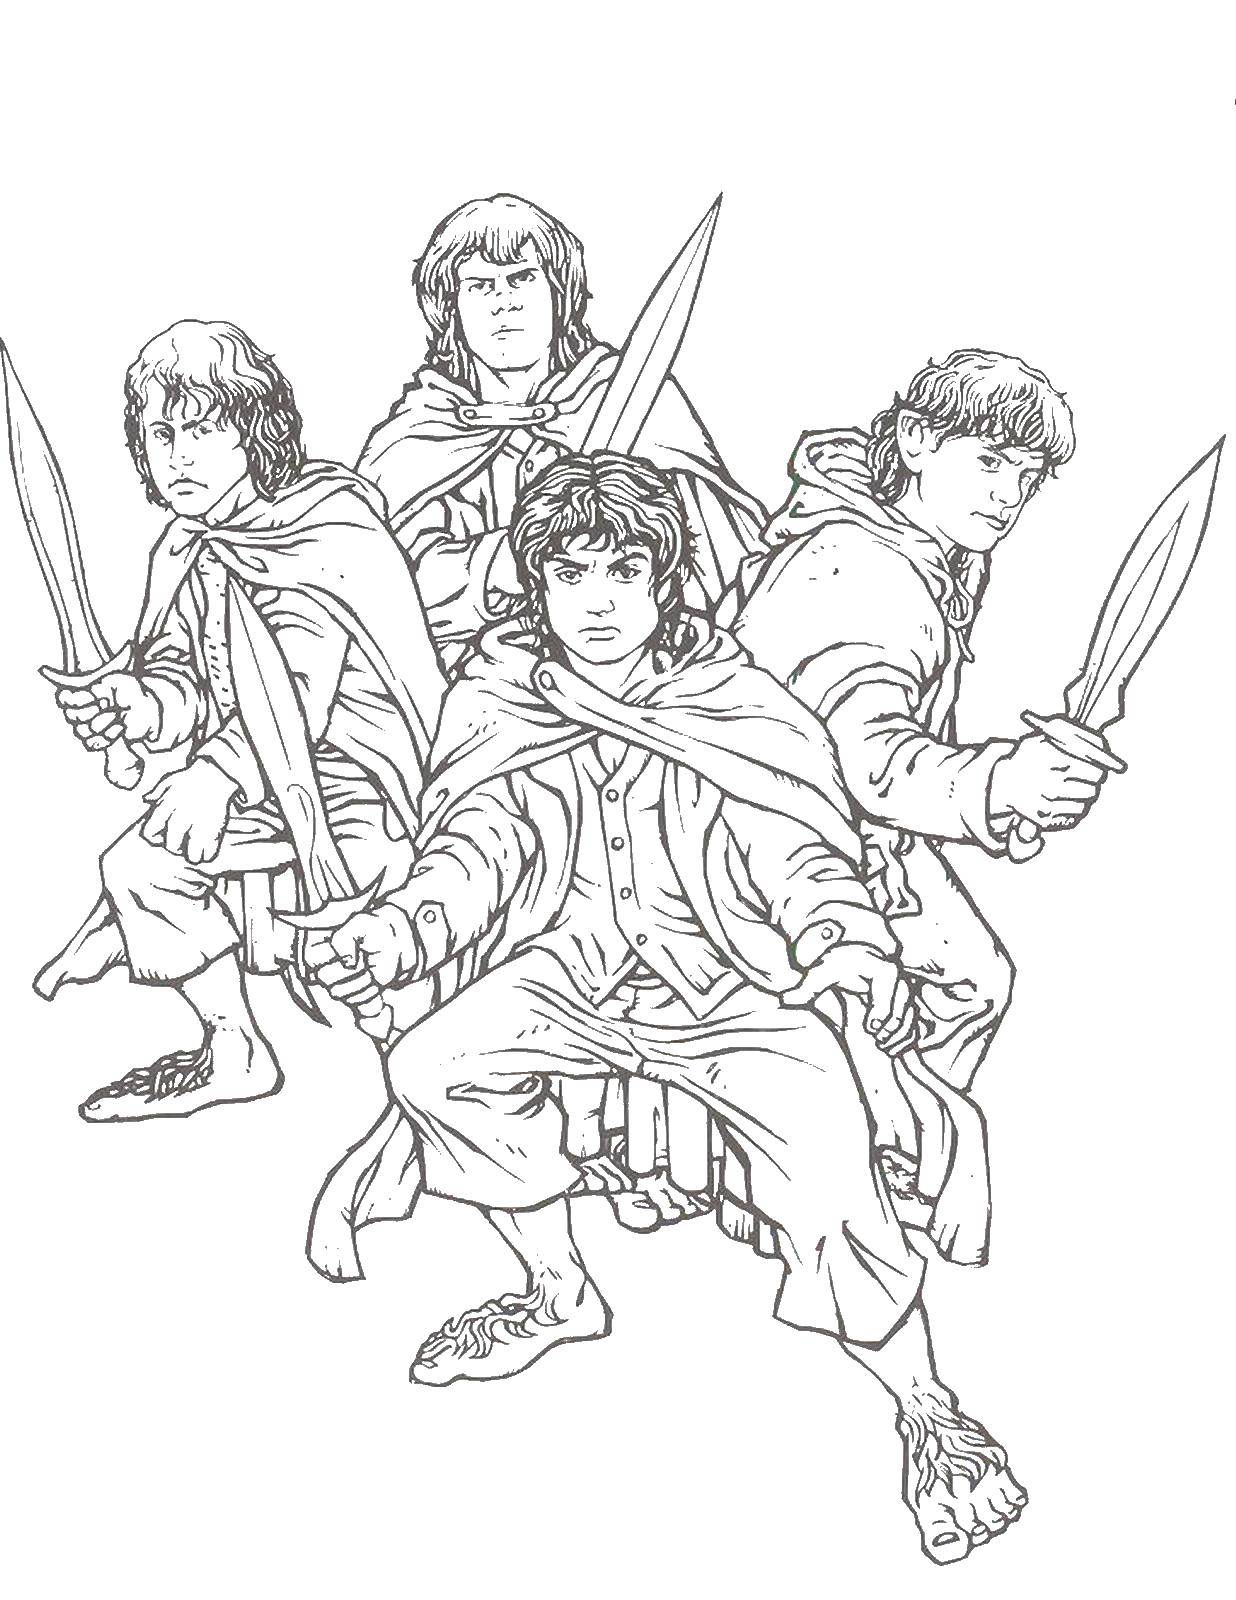 Coloring The Lord of the rings. Category Lord of the rings. Tags:  movies, Lord of the rings.